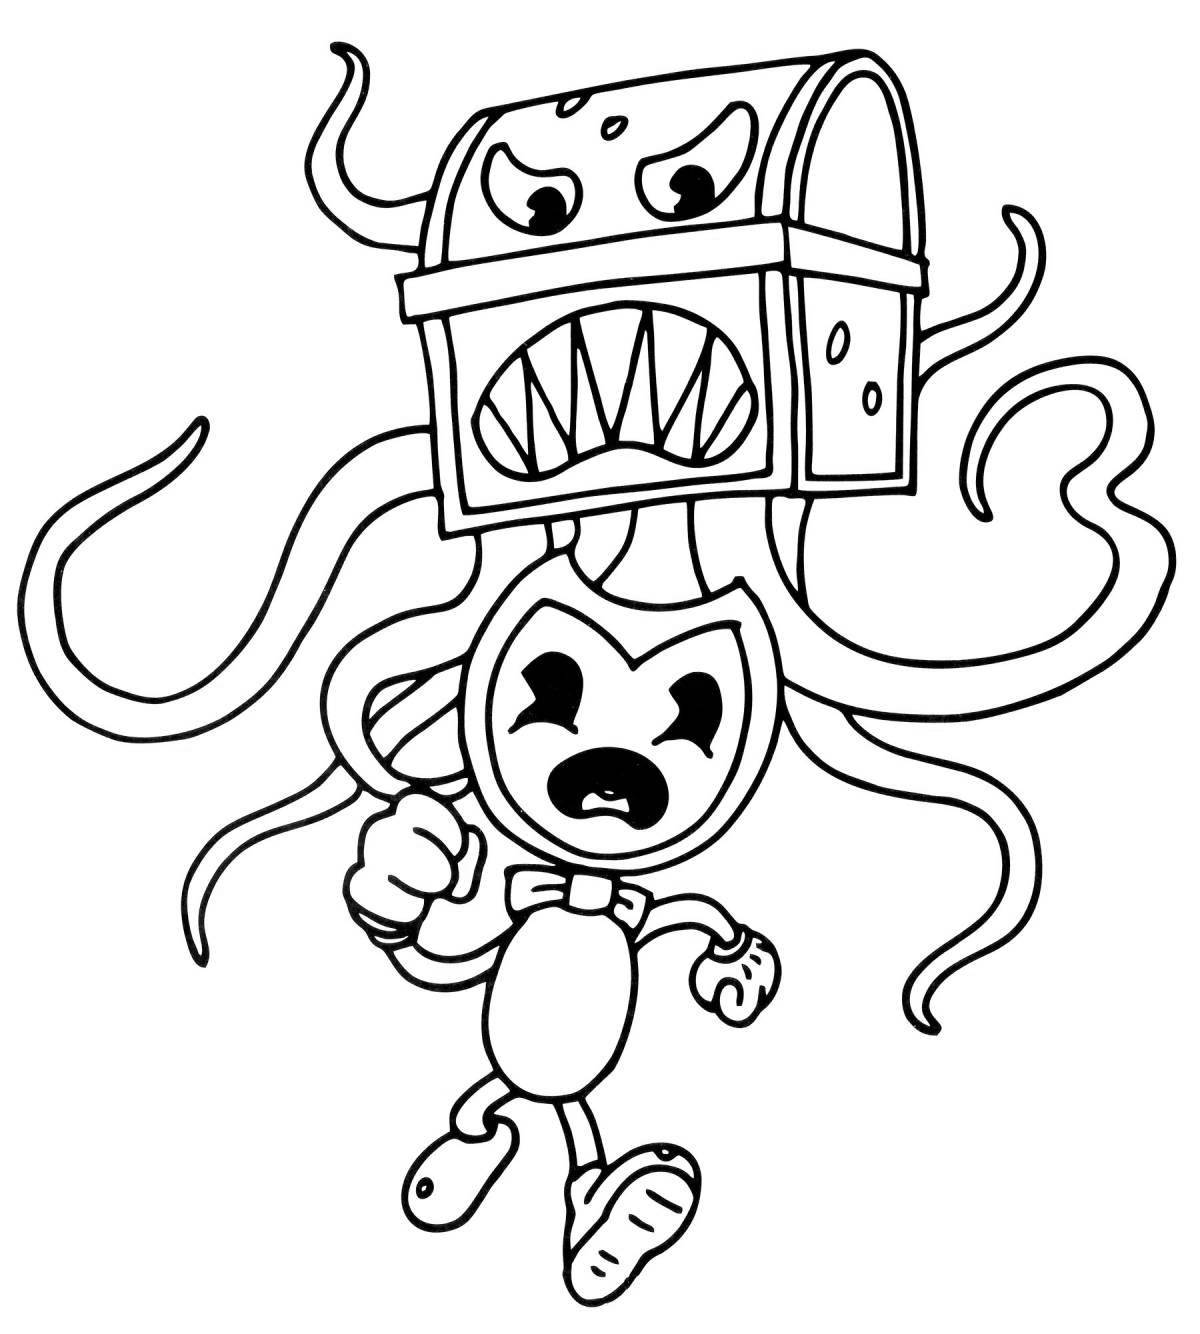 Bendy's adorable coloring page